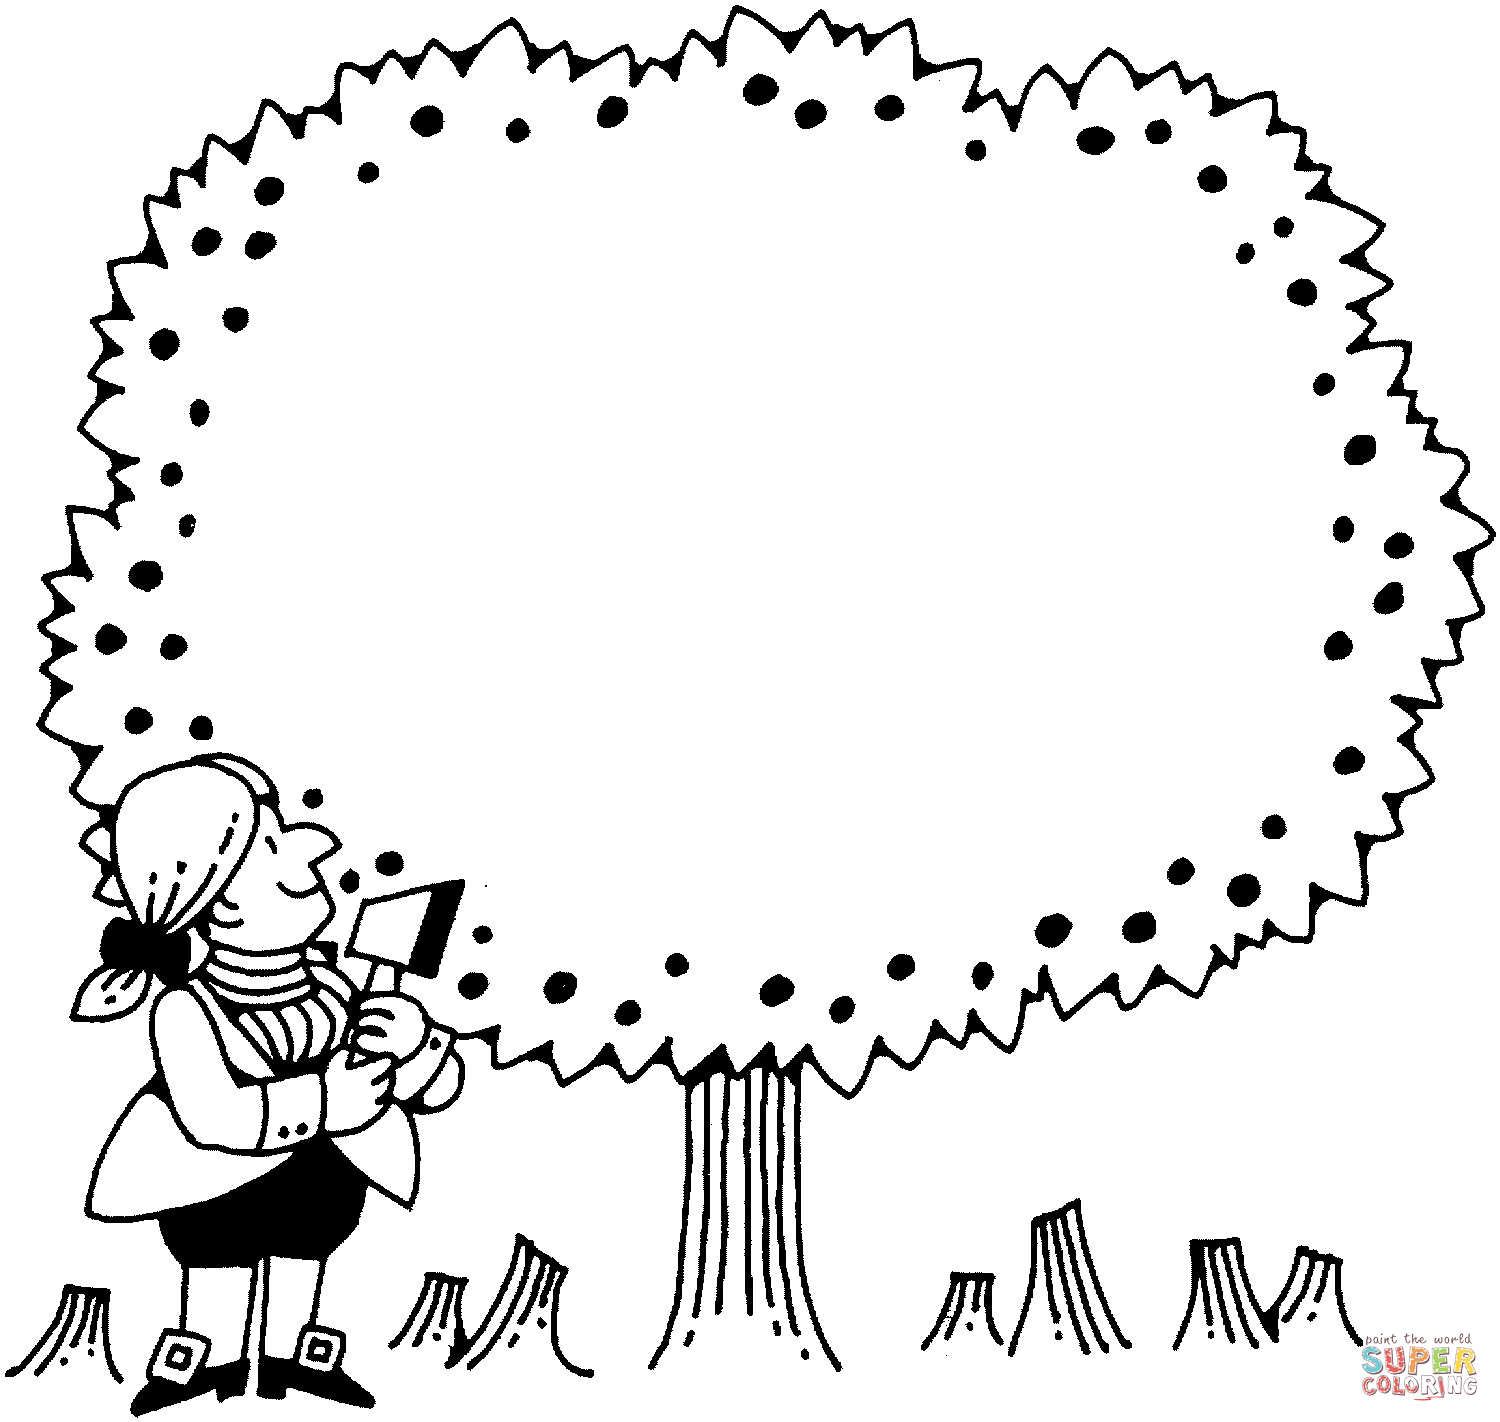 Cherry tree coloring pages | Free Coloring Pages